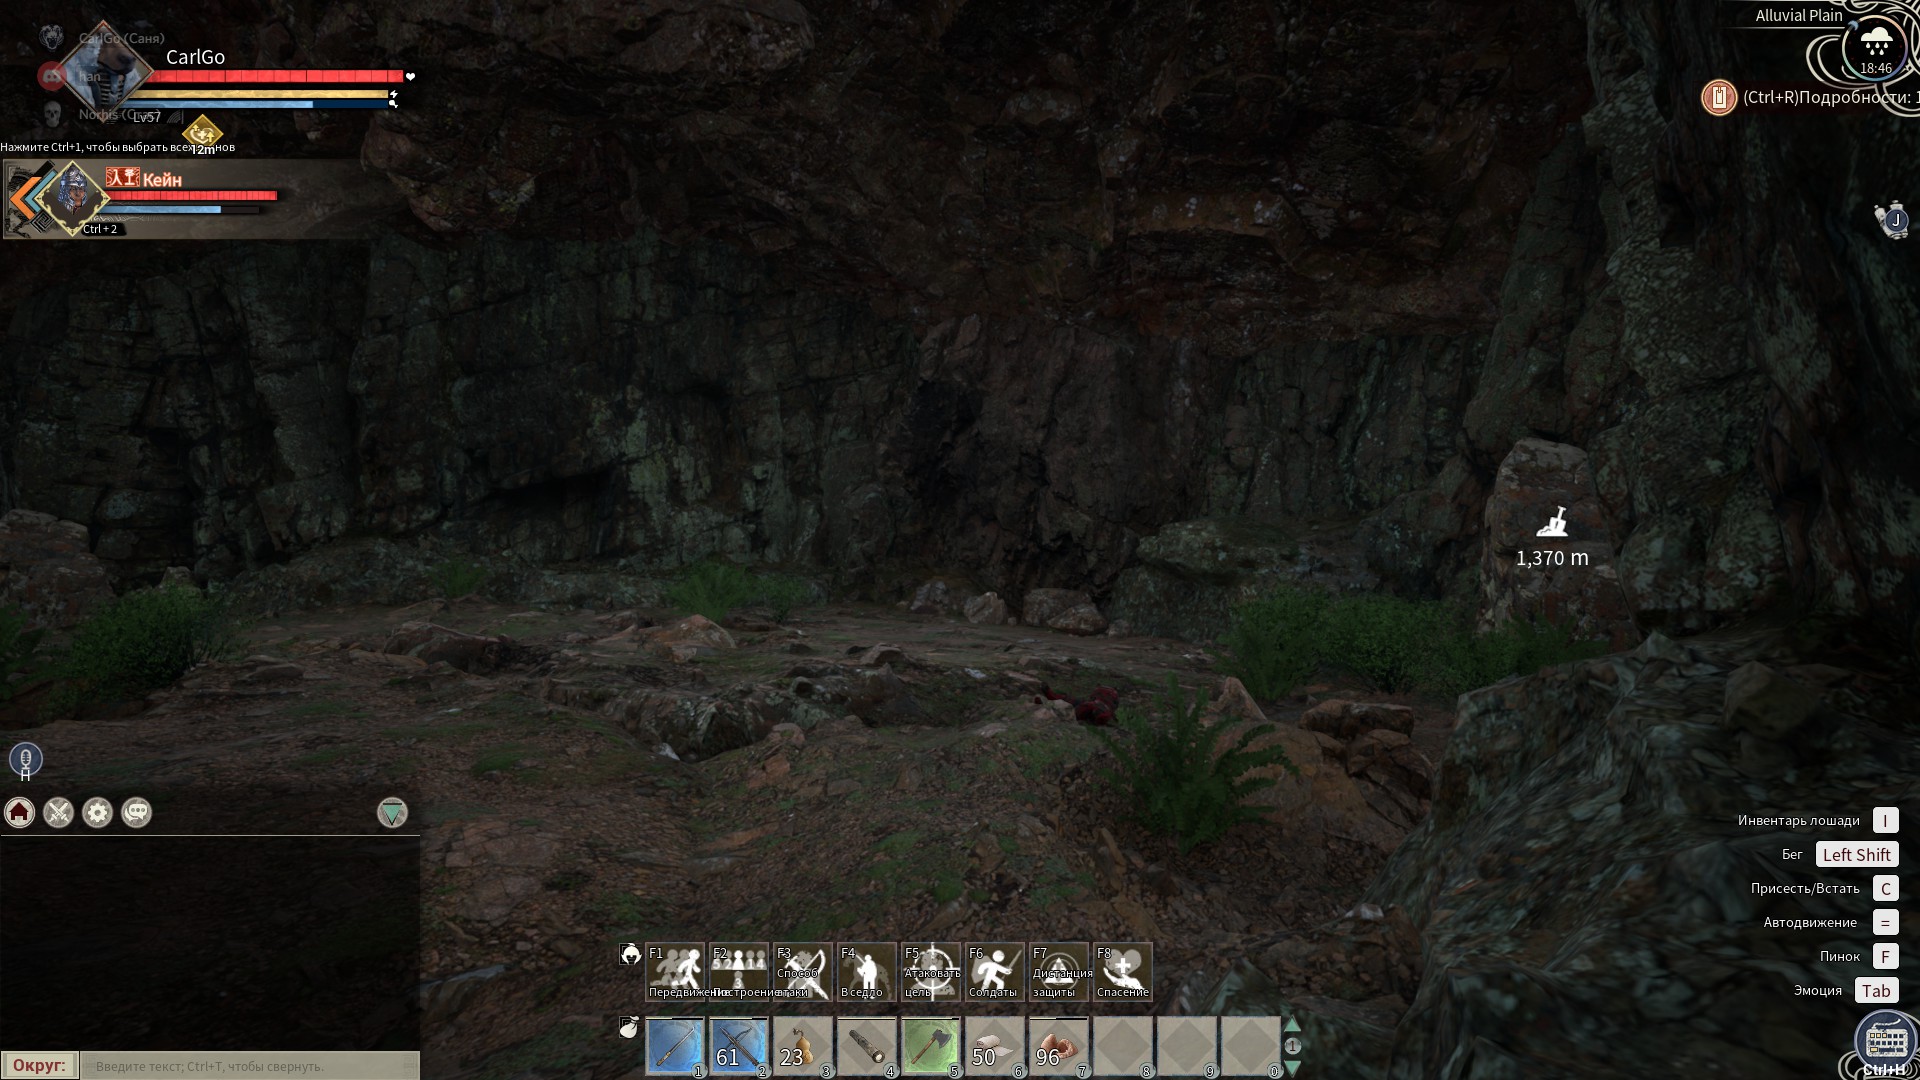 : /Locations: Cave image 19